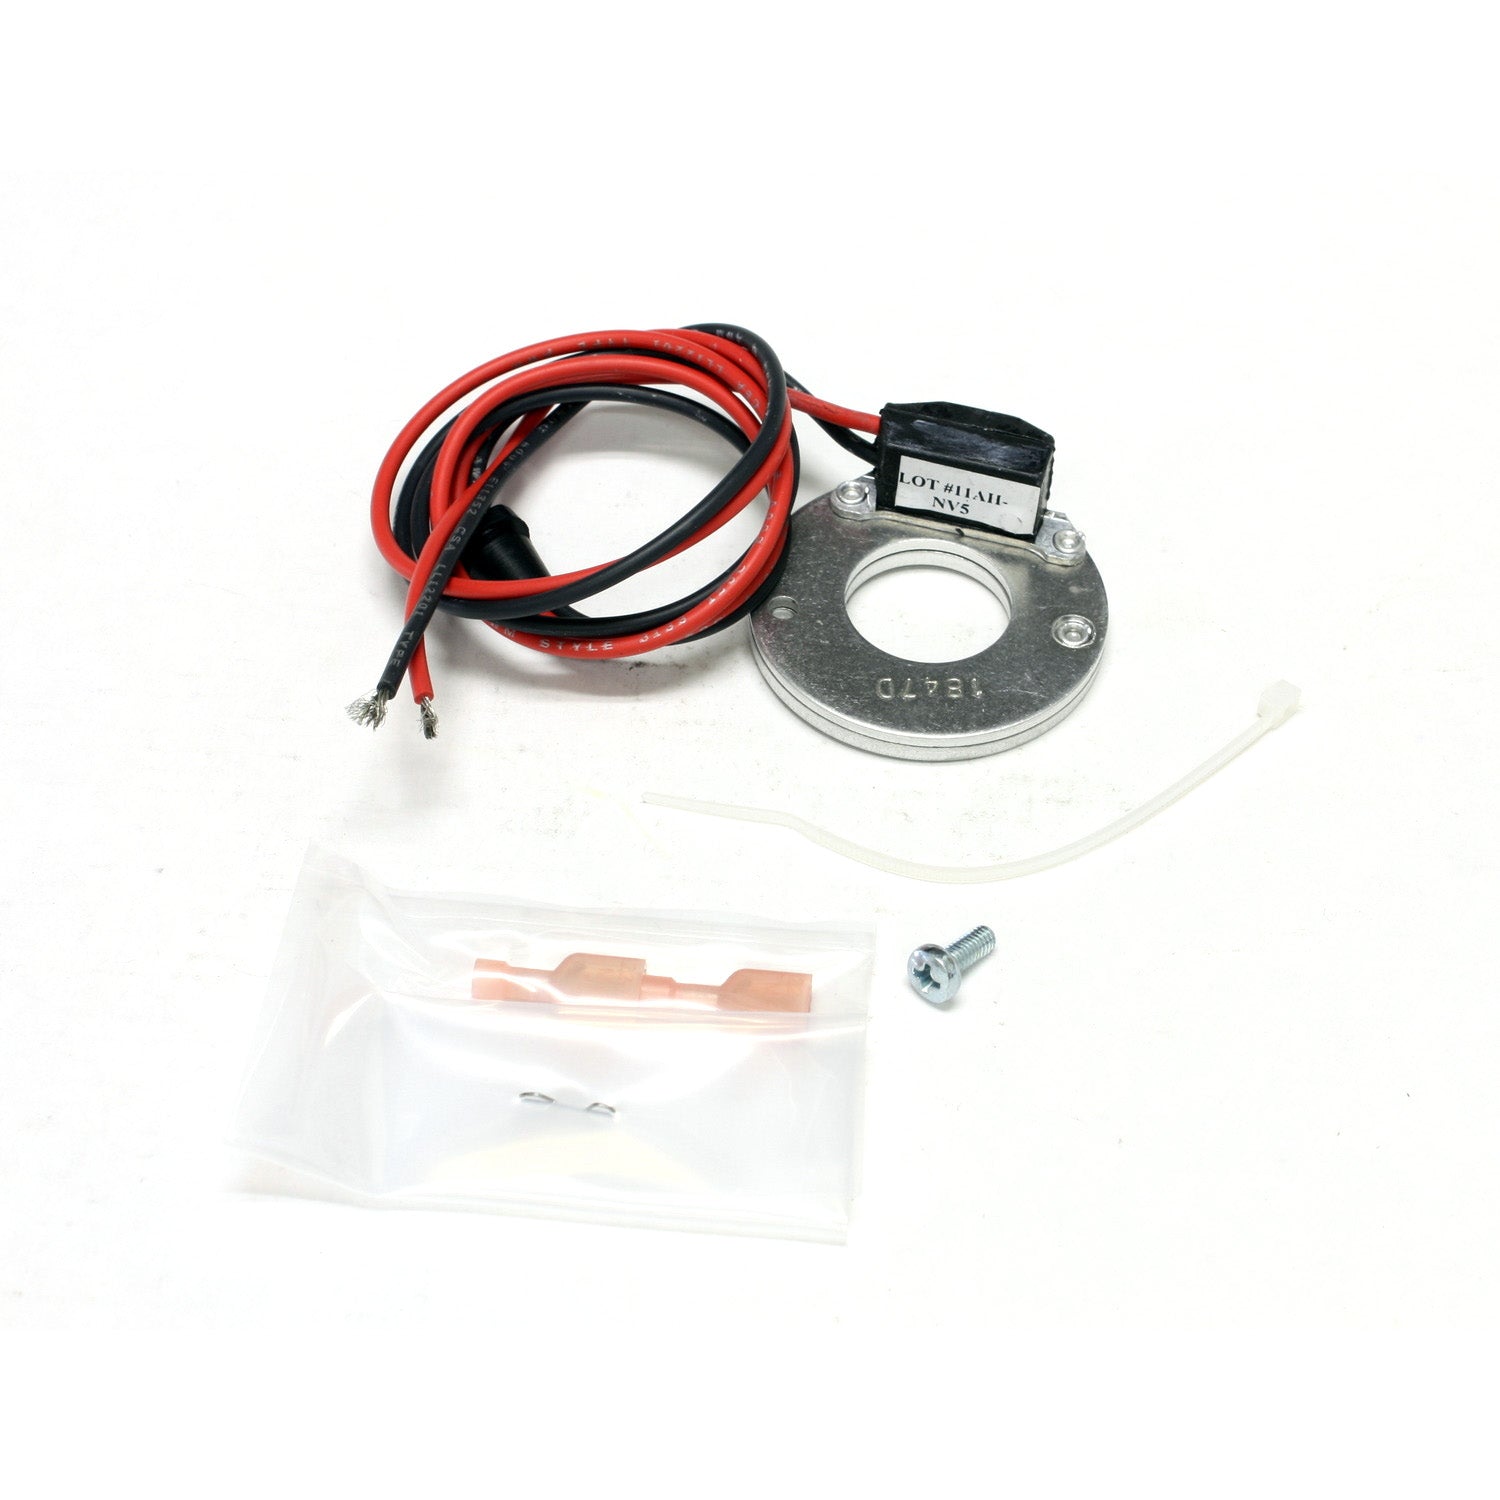 PerTronix D500709 Module (replacement) Ignitor for PerTronix Flame-Thrower VW Cast Non-Vacuum Distributor